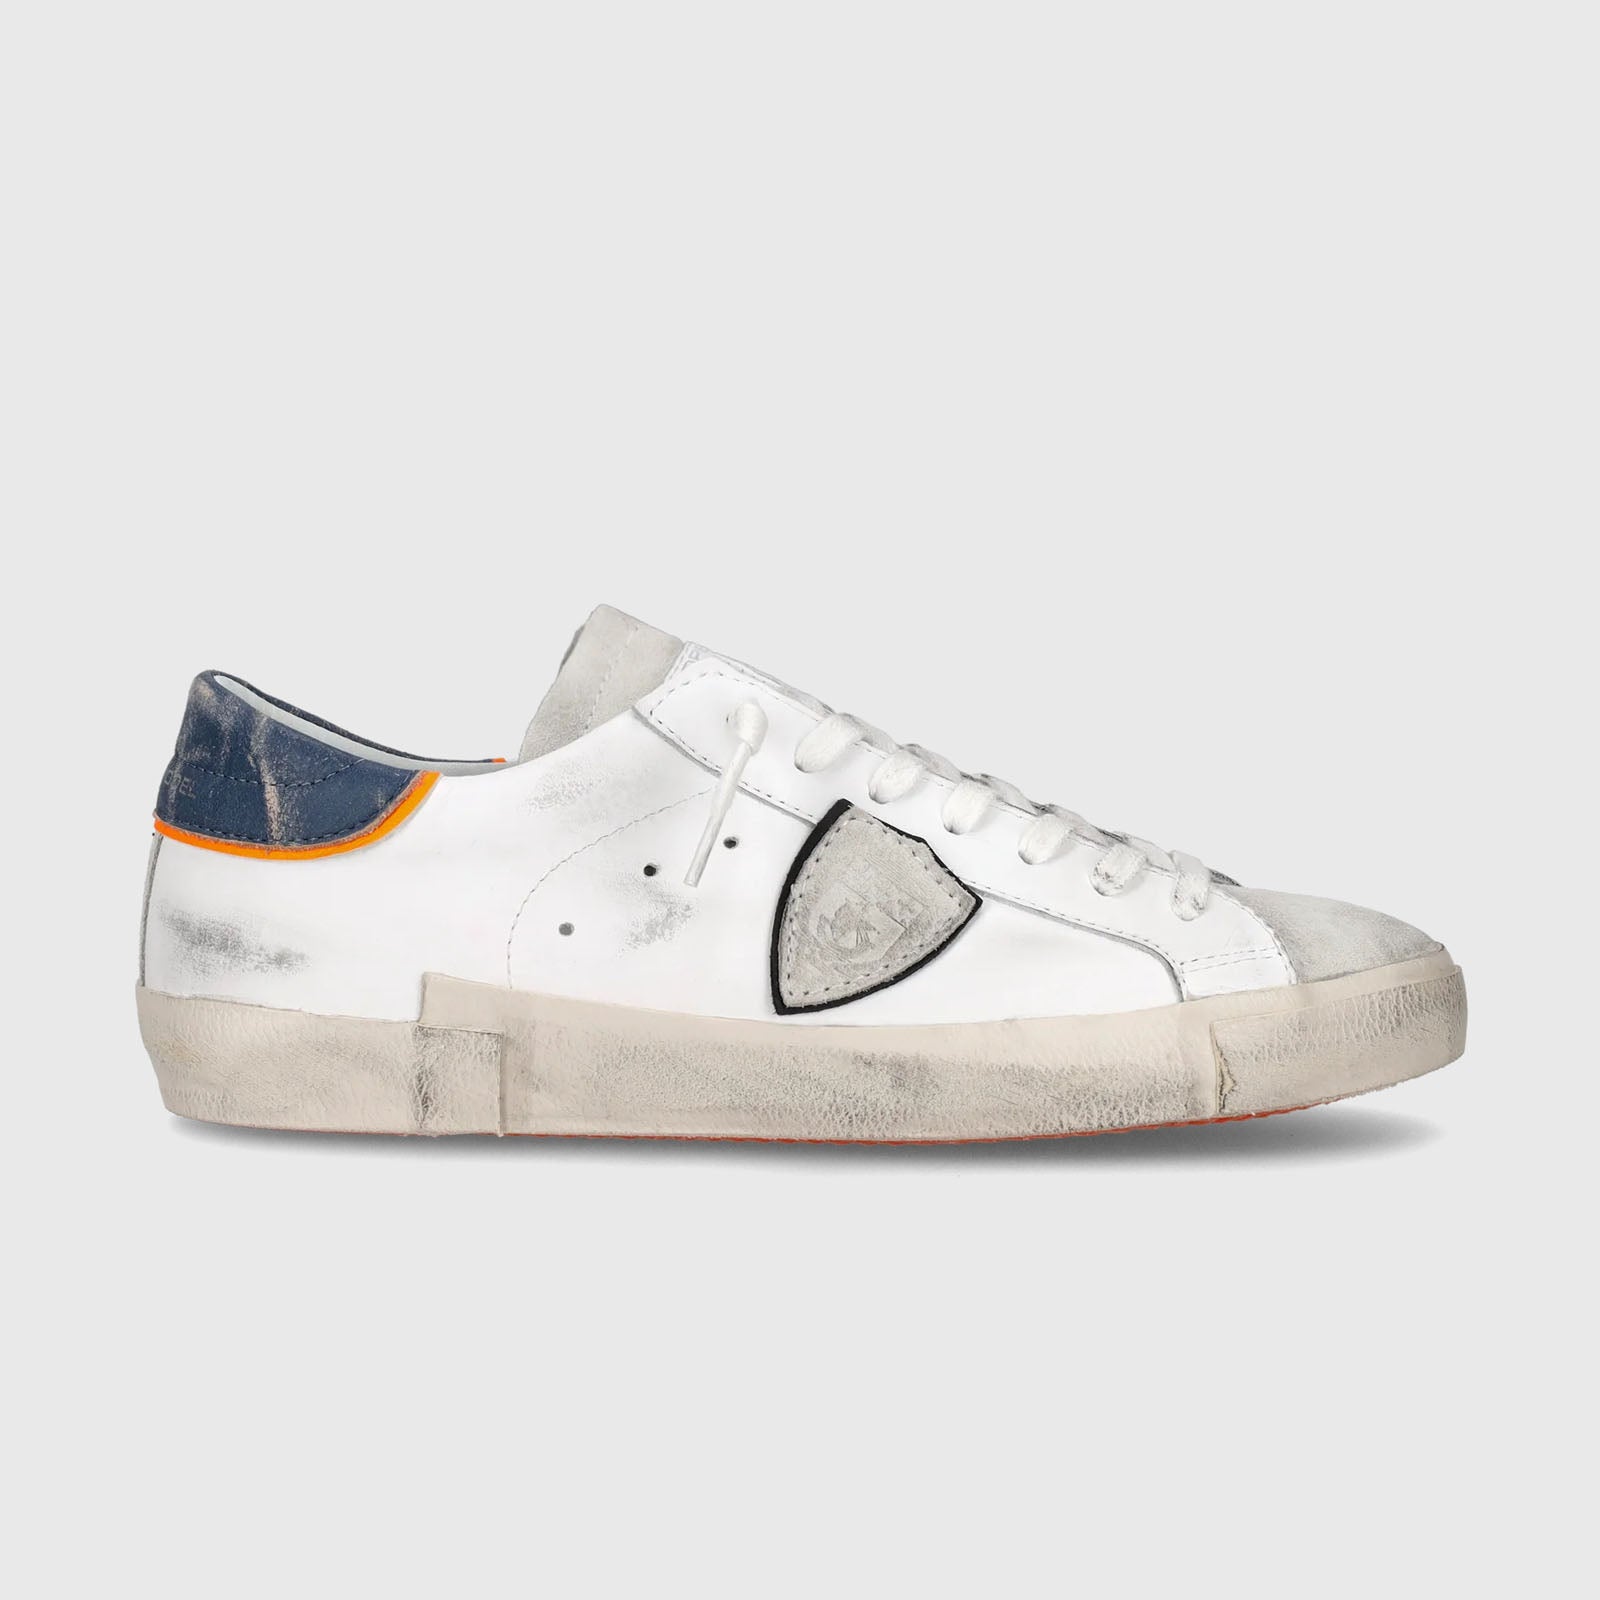 Philippe Model PRSX Vintage Veal Leather Sneakers White/Blue - 7